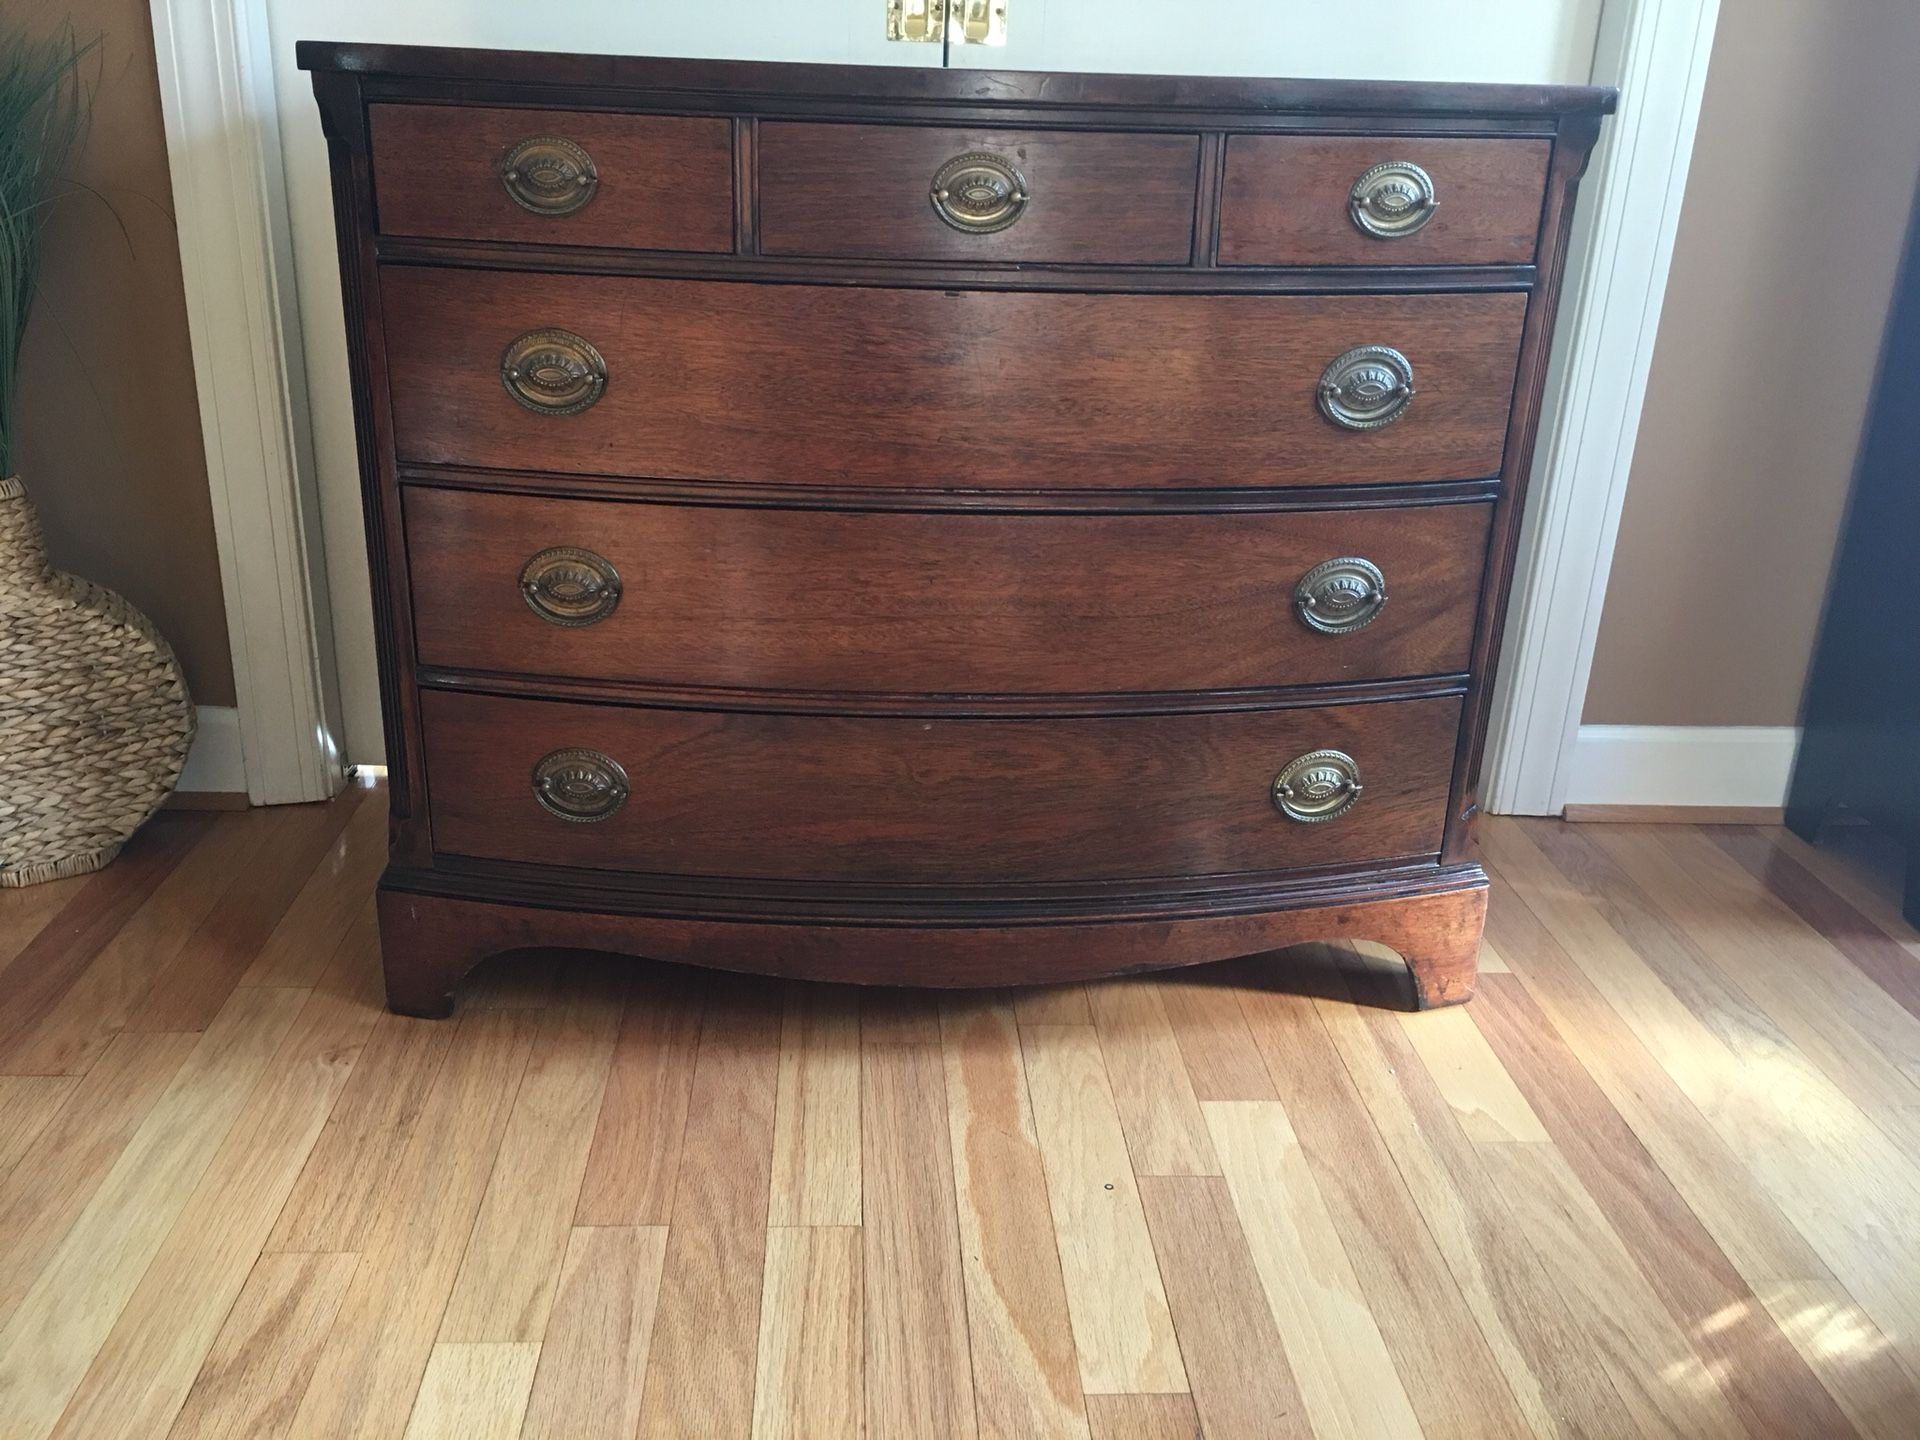 Bowfront chest of drawers